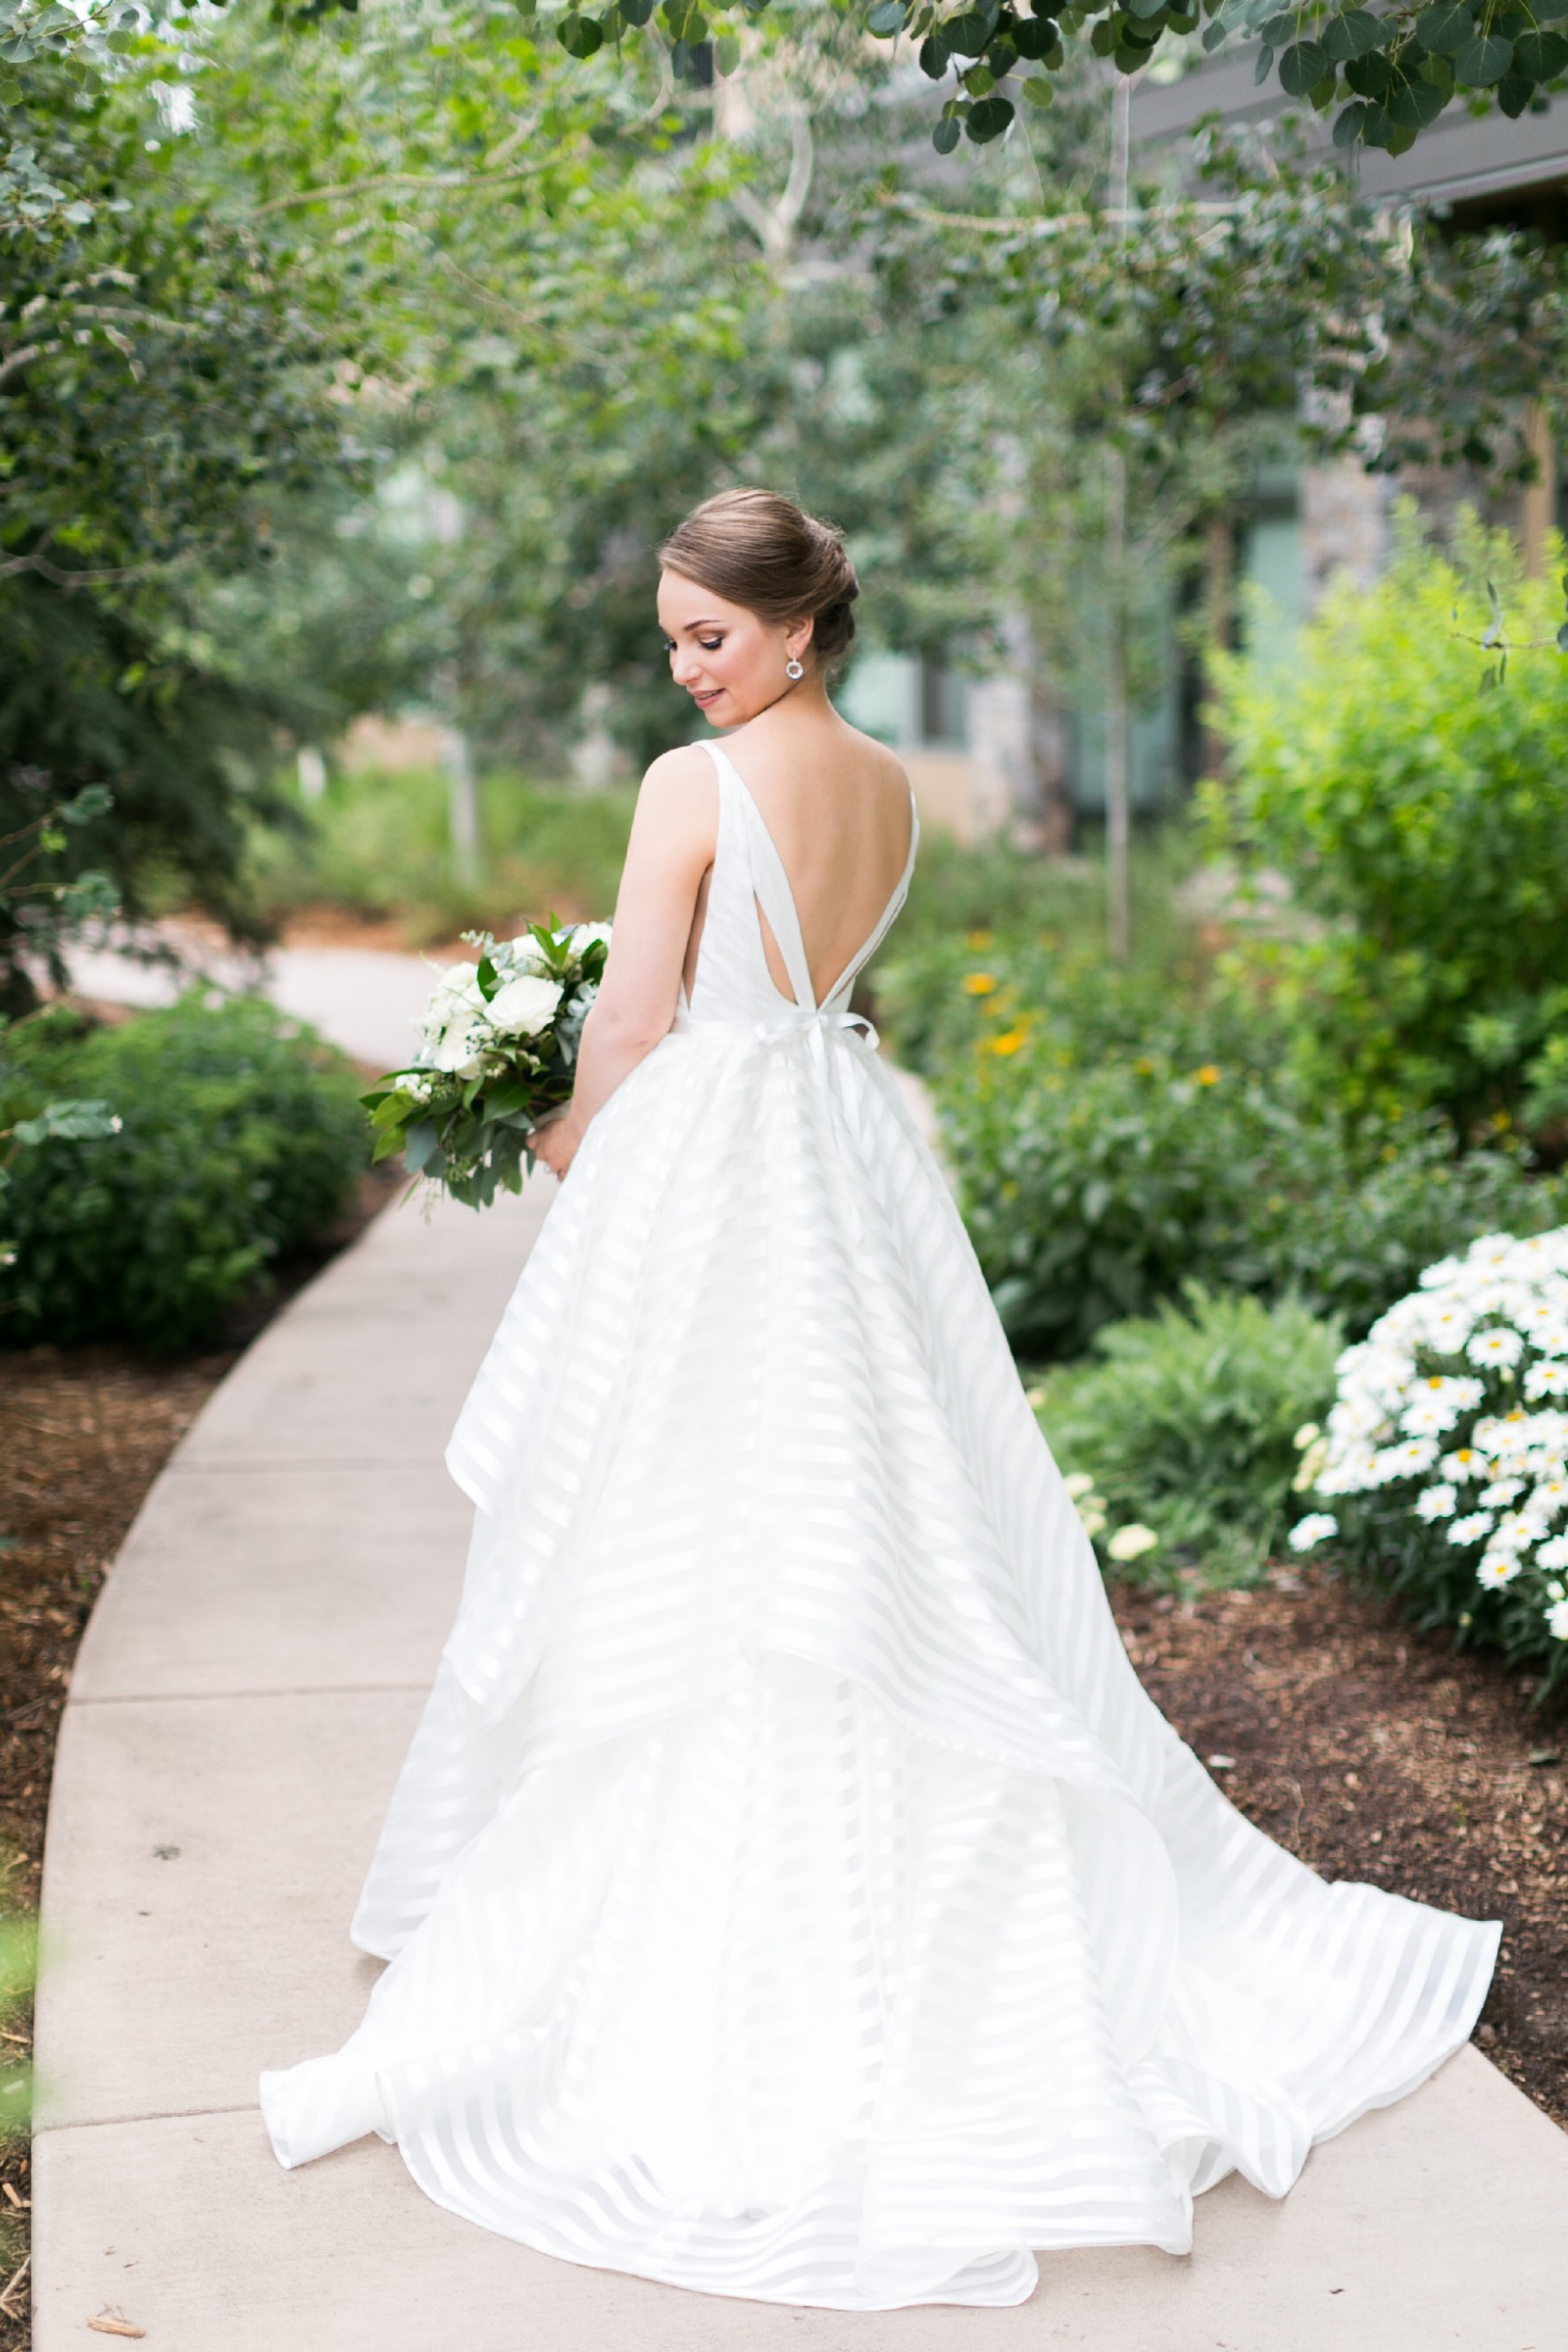 hayley paige striped wedding gown